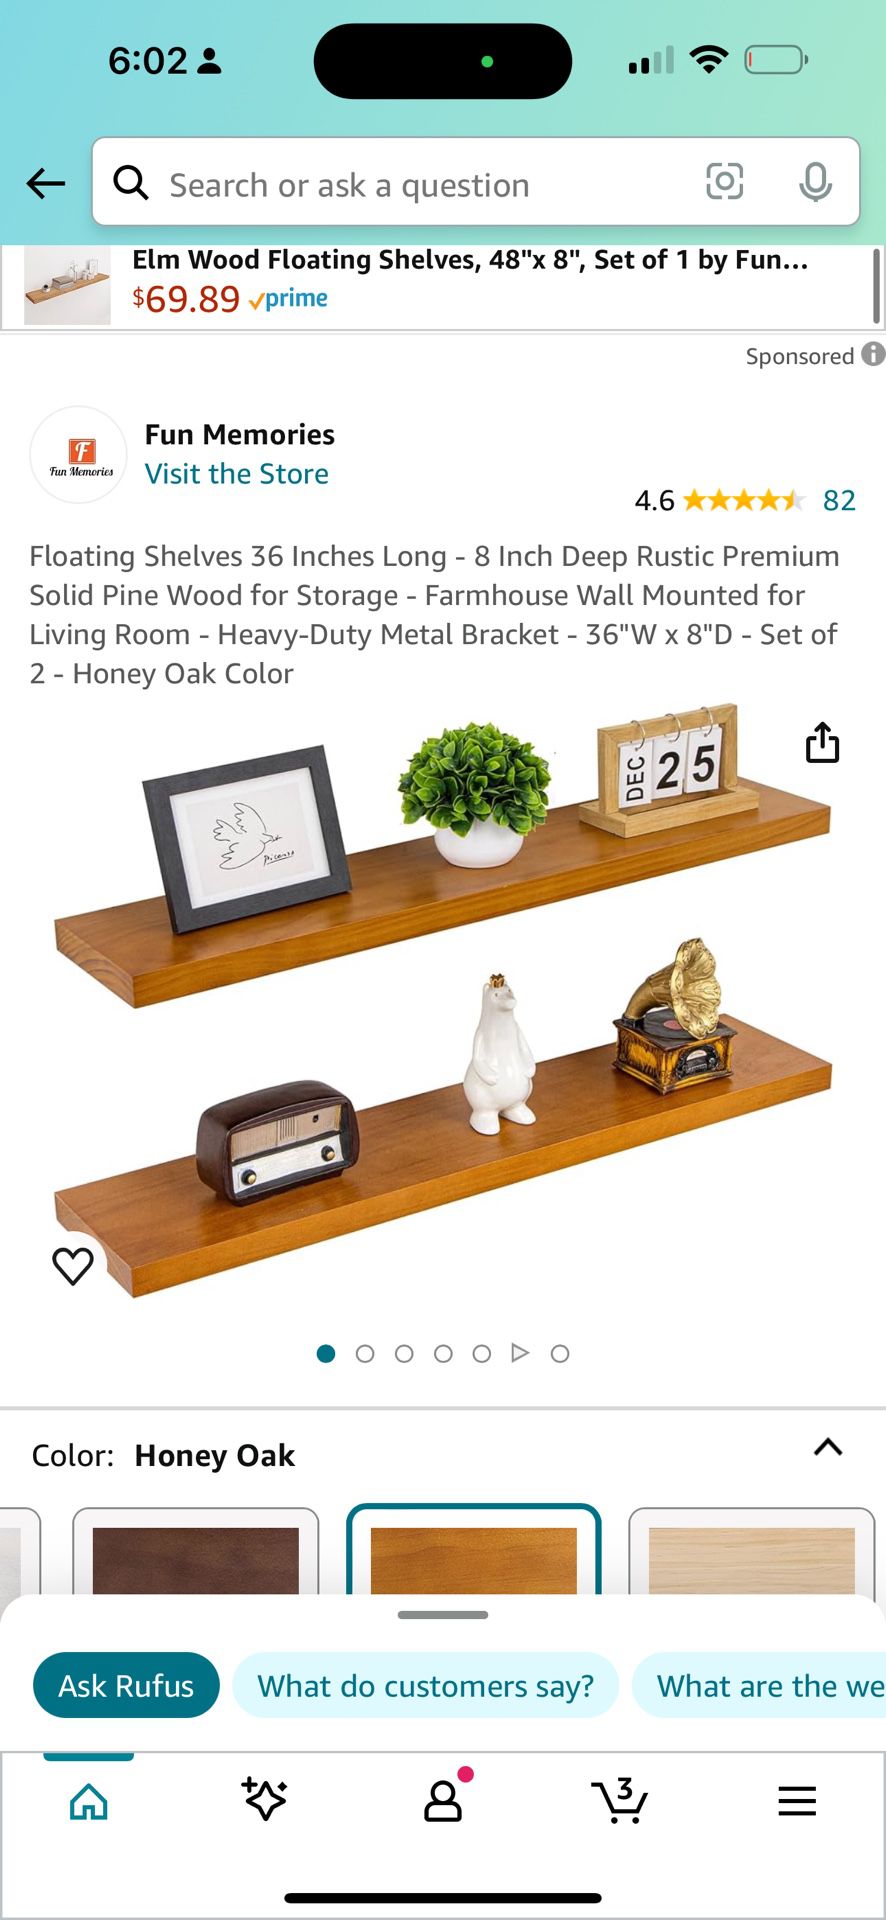 Floating Shelves 36 Inches Long - 8 Inch Deep Rustic Premium Solid Pine Wood for Storage - Farmhouse Wall Mounted for Living Room - Heavy-Duty Metal B